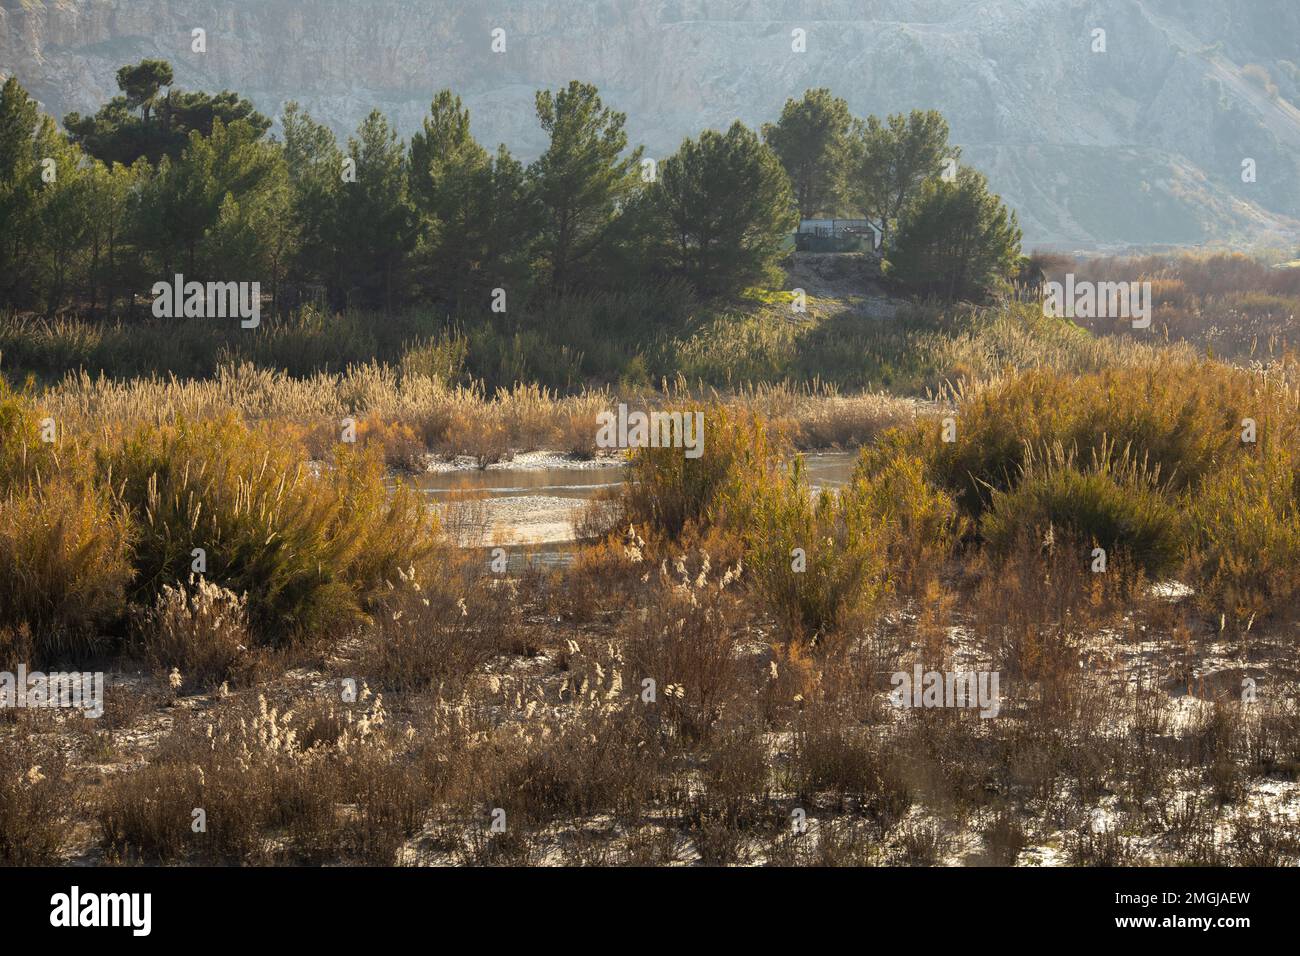 An incredible swampy area covered with faded plants in the rays of the evening sun Stock Photo